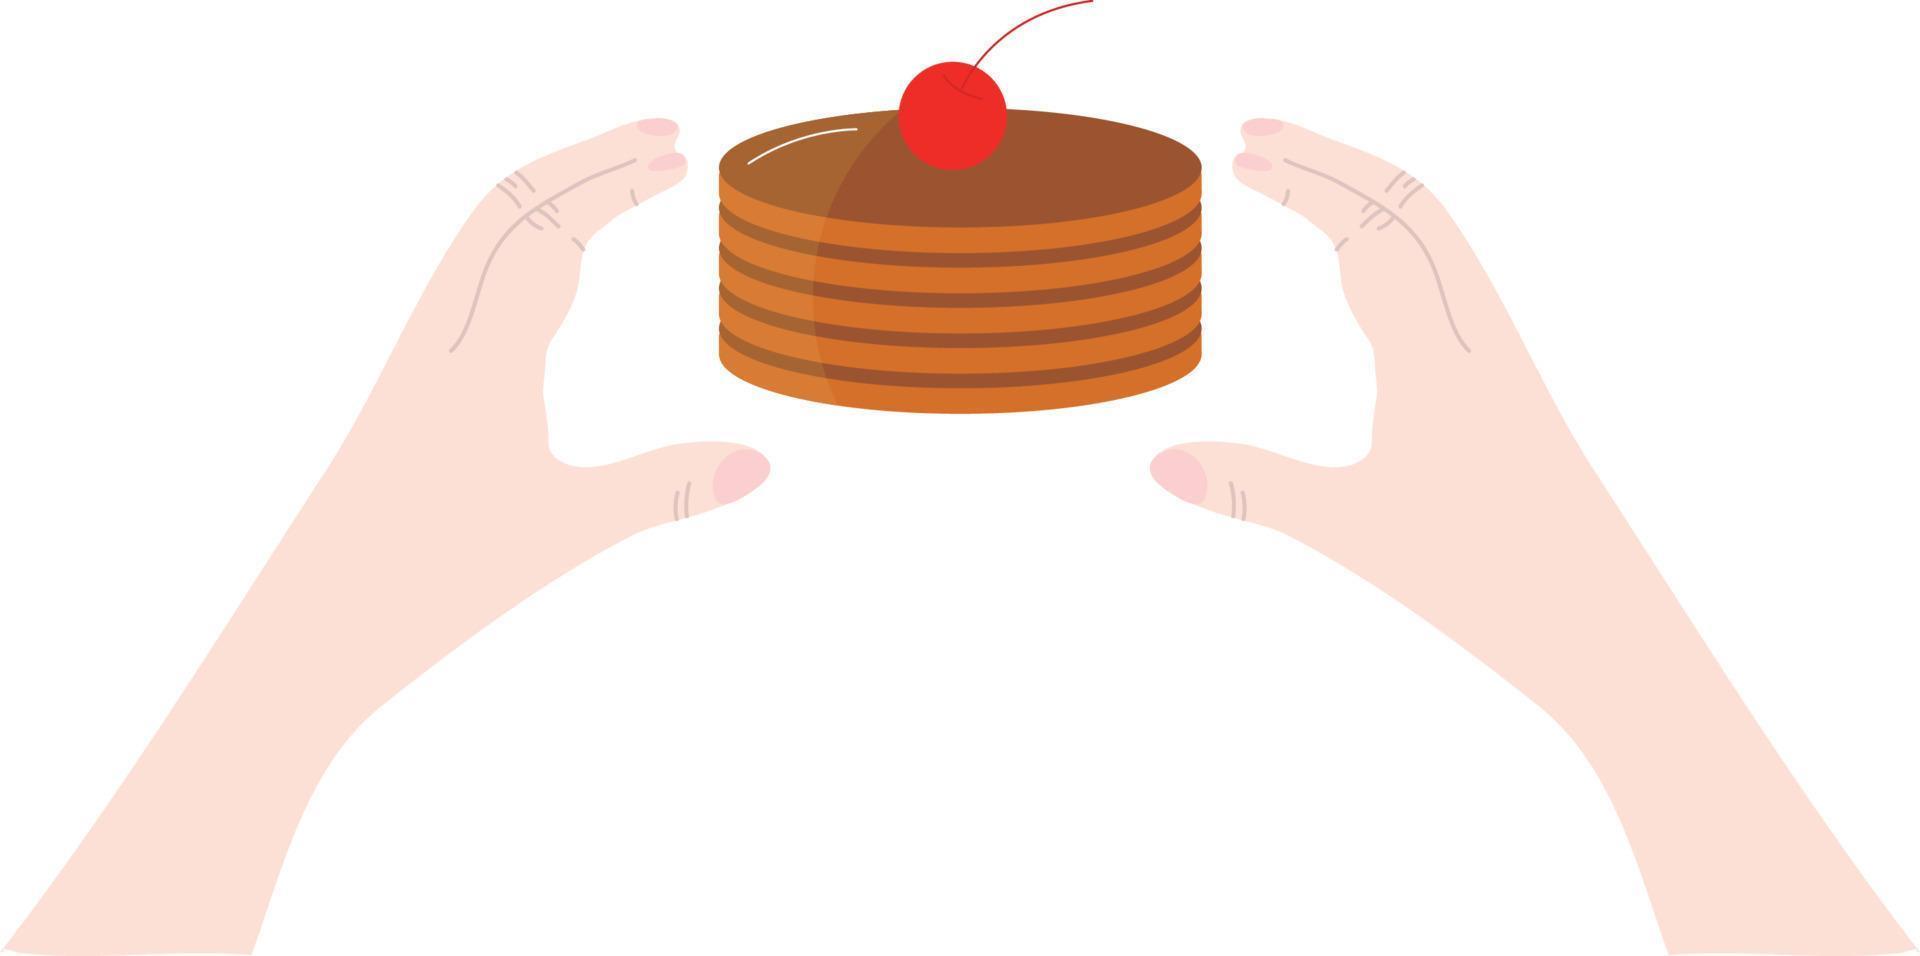 Simple and delicious pancakes. Breakfast concept elements vector